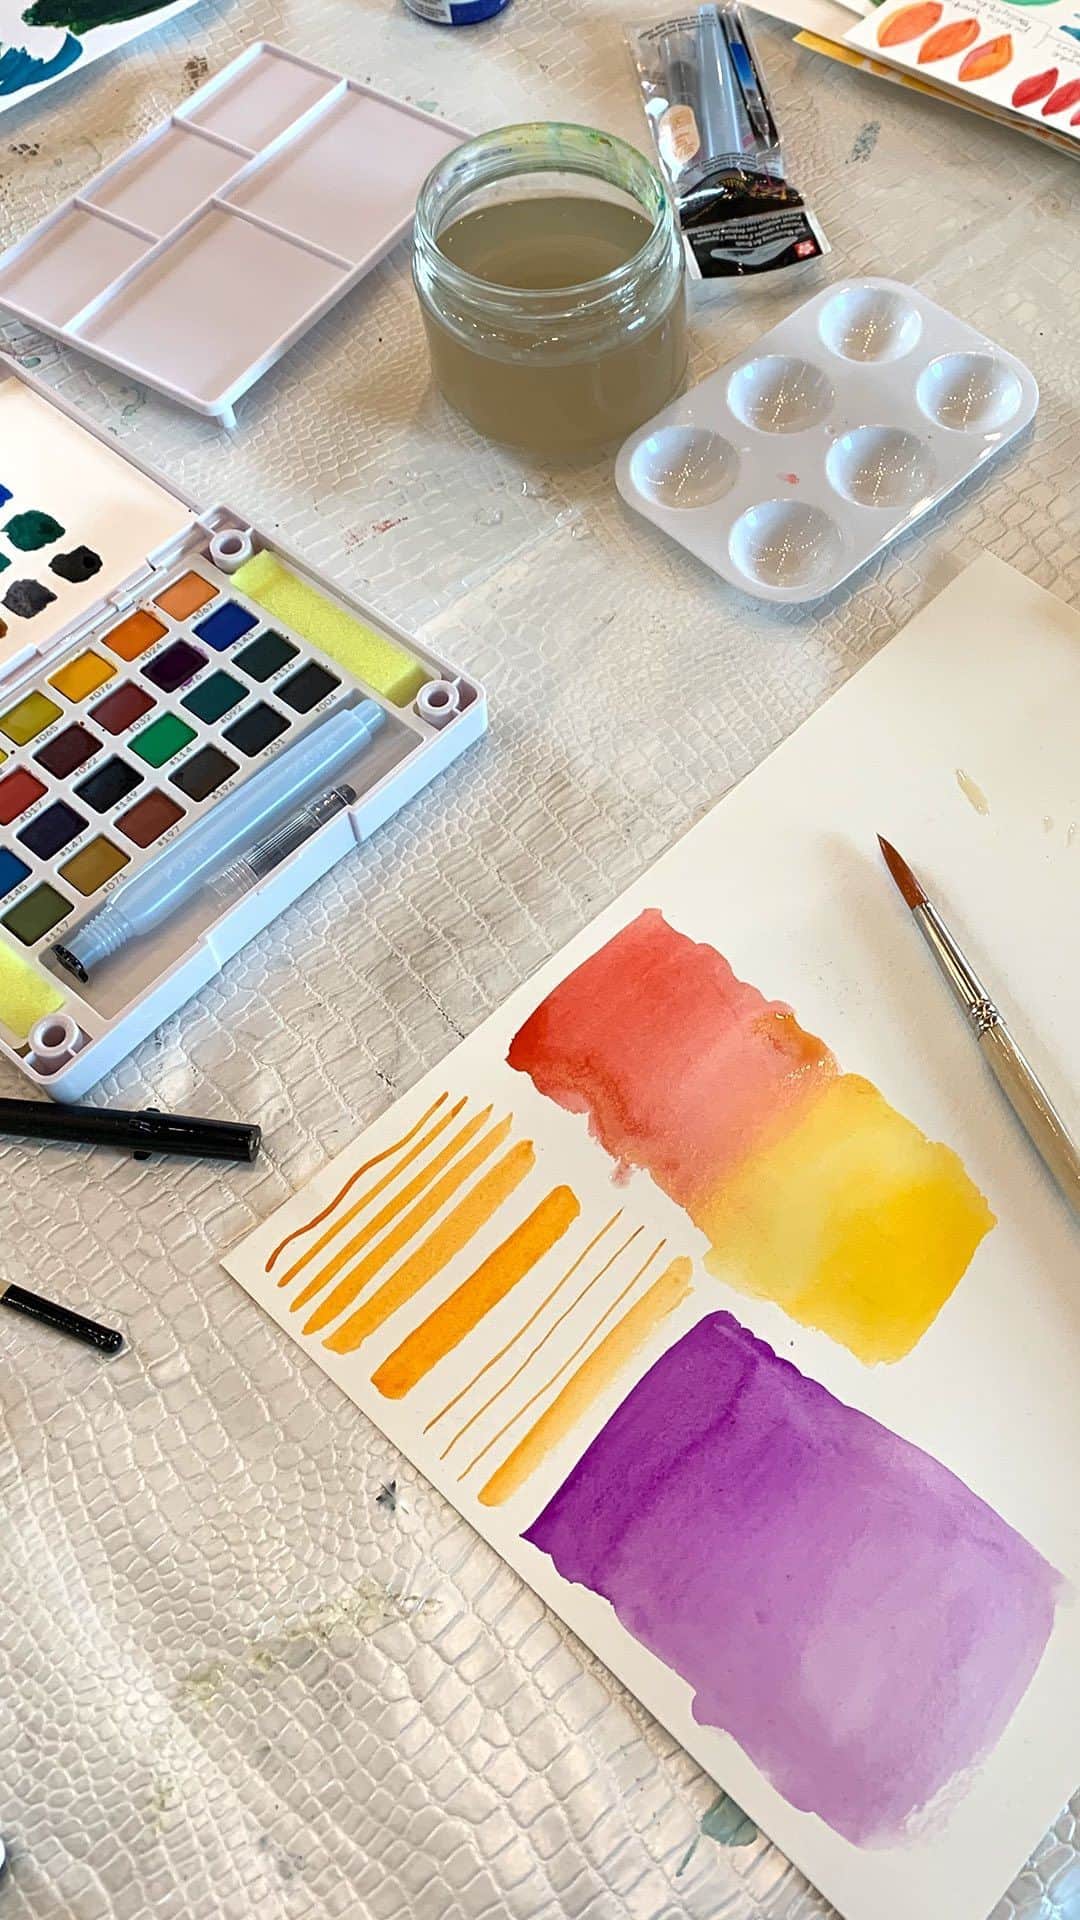 Sakura of America（サクラクレパス）のインスタグラム：「Hi it’s Jeanetta again of @nettdesigns and I am here to share with you how I taught my watercolor workshop at my art retreat in France using the Koi Water Color kit. If you saw my previous post, you know that I prepped some examples for this lesson. I taught them watercolor basics starting off with making gradient washes and then making curves and lines of different widths and waviness. I wanted them to get used to moving the paint in different ways and see how the paint reacts to the amount of water they use. Then they could take the methods and create circles, other shapes and words.   A good watercolor wash is made by using a wet brush dipped into watercolor and moving it around your paper. Adding more water can enable the paint to bleed and spread out into a larger area. It can be used for creating backgrounds, making a sky, filling in shapes and so much more. Dab other colors into the wet areas using your brush, creating a wet-on-wet technique that gives it a lot of texture and blends the colors in such gorgeous ways.」